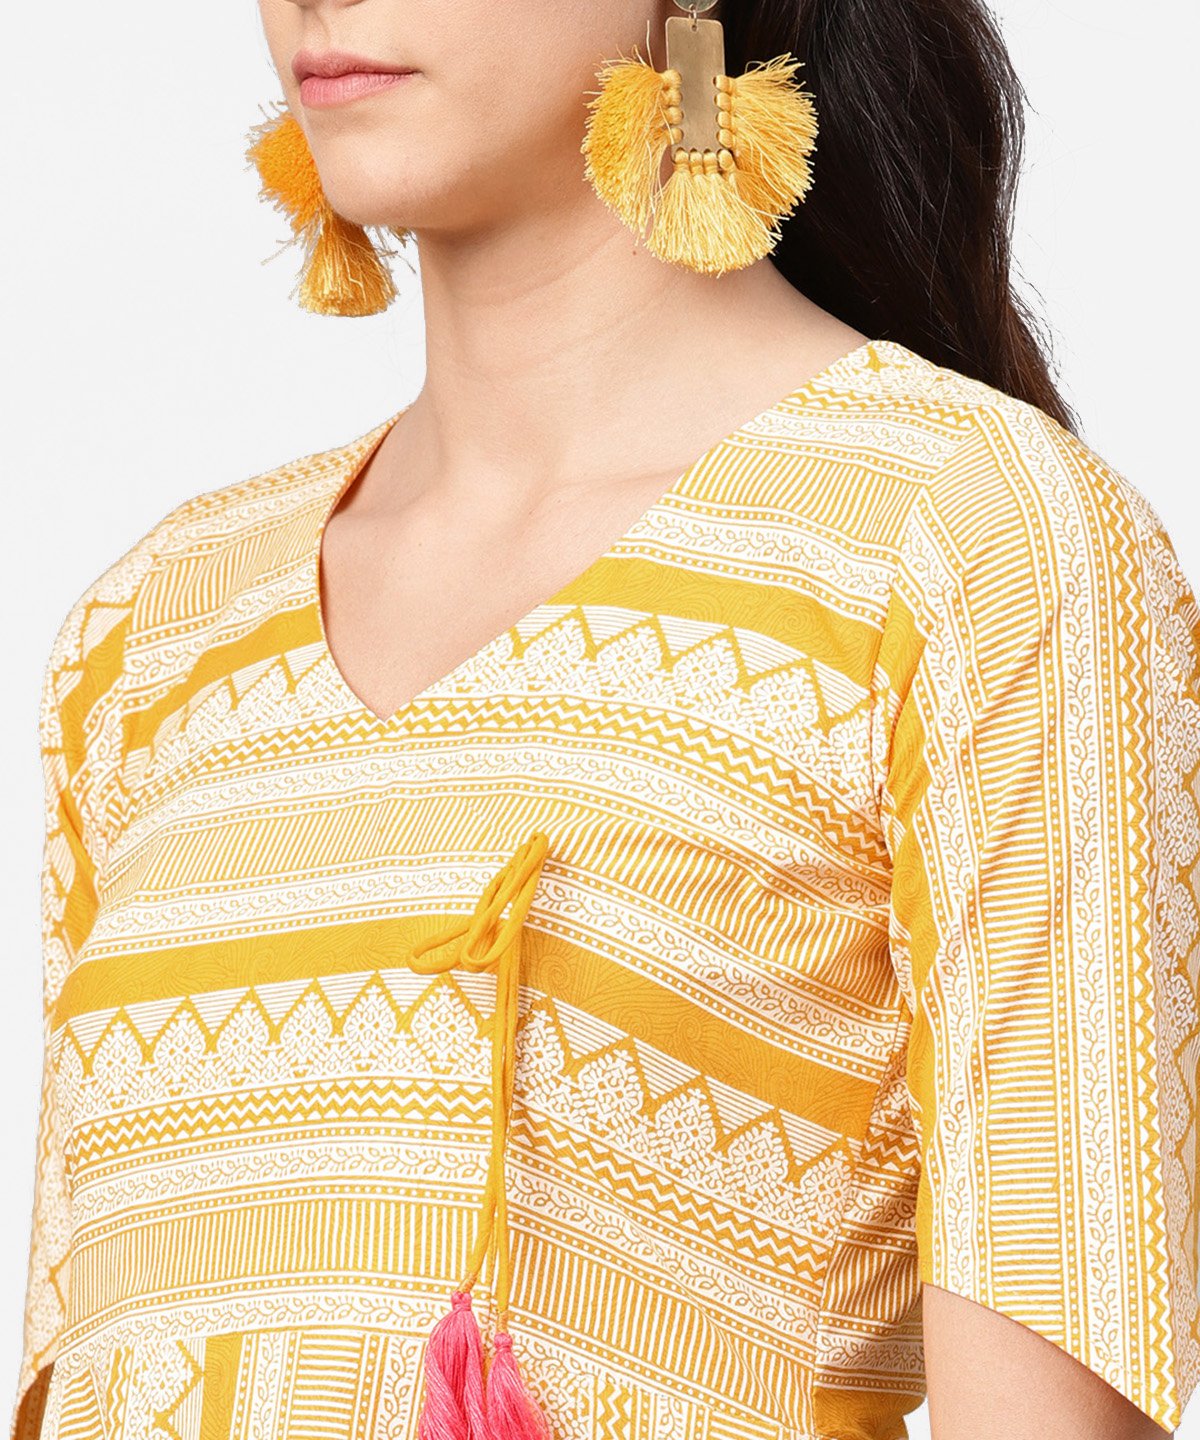 Women's Yellow Printed Half Slevee Cotton A-Line Kurta With Dori Work With Ankle Length Pant - Nayo Clothing